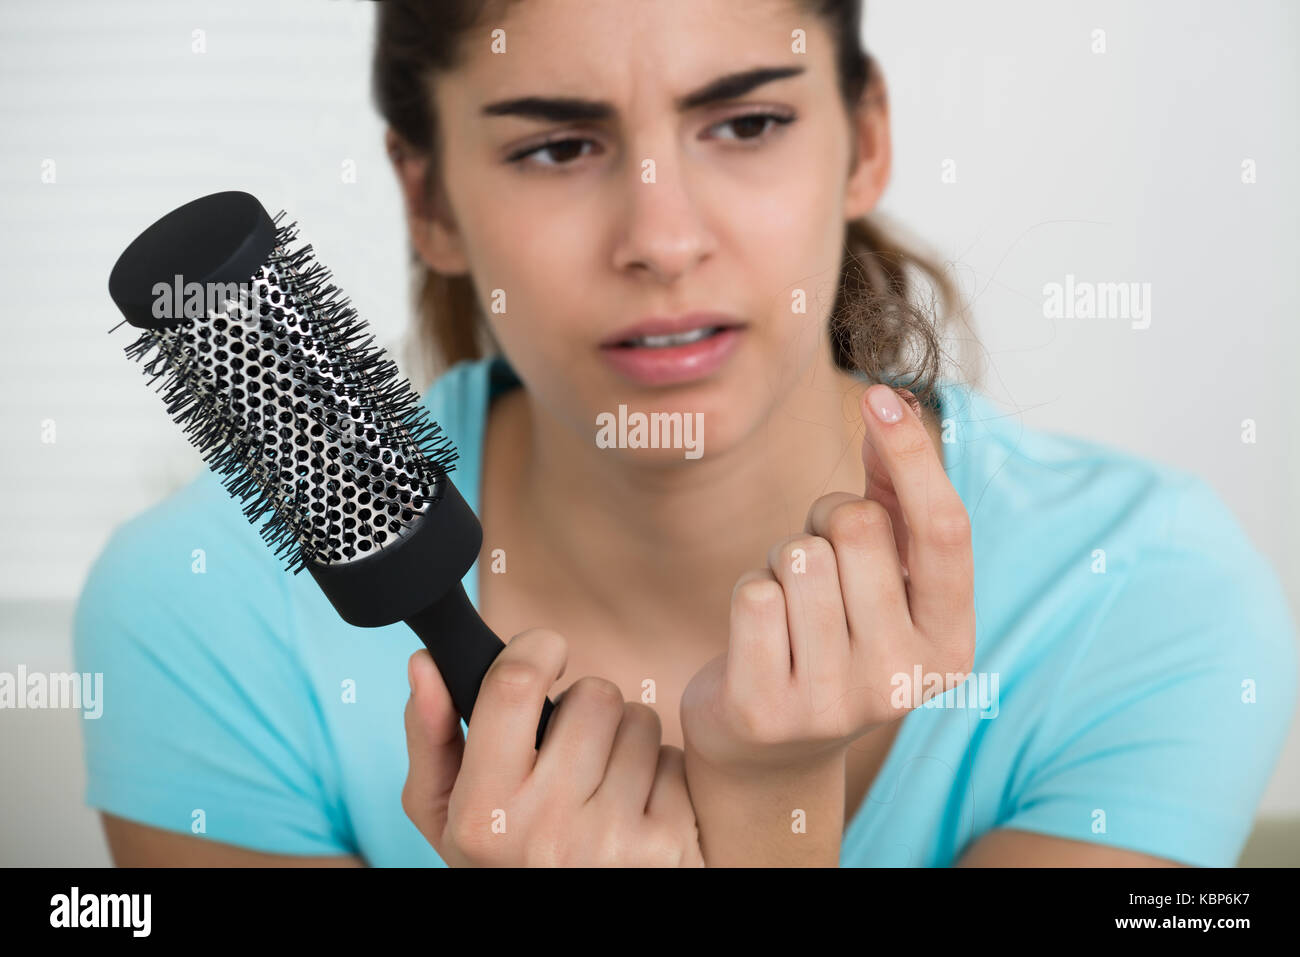 Shocked young woman holding comb while looking at hair loss Stock Photo